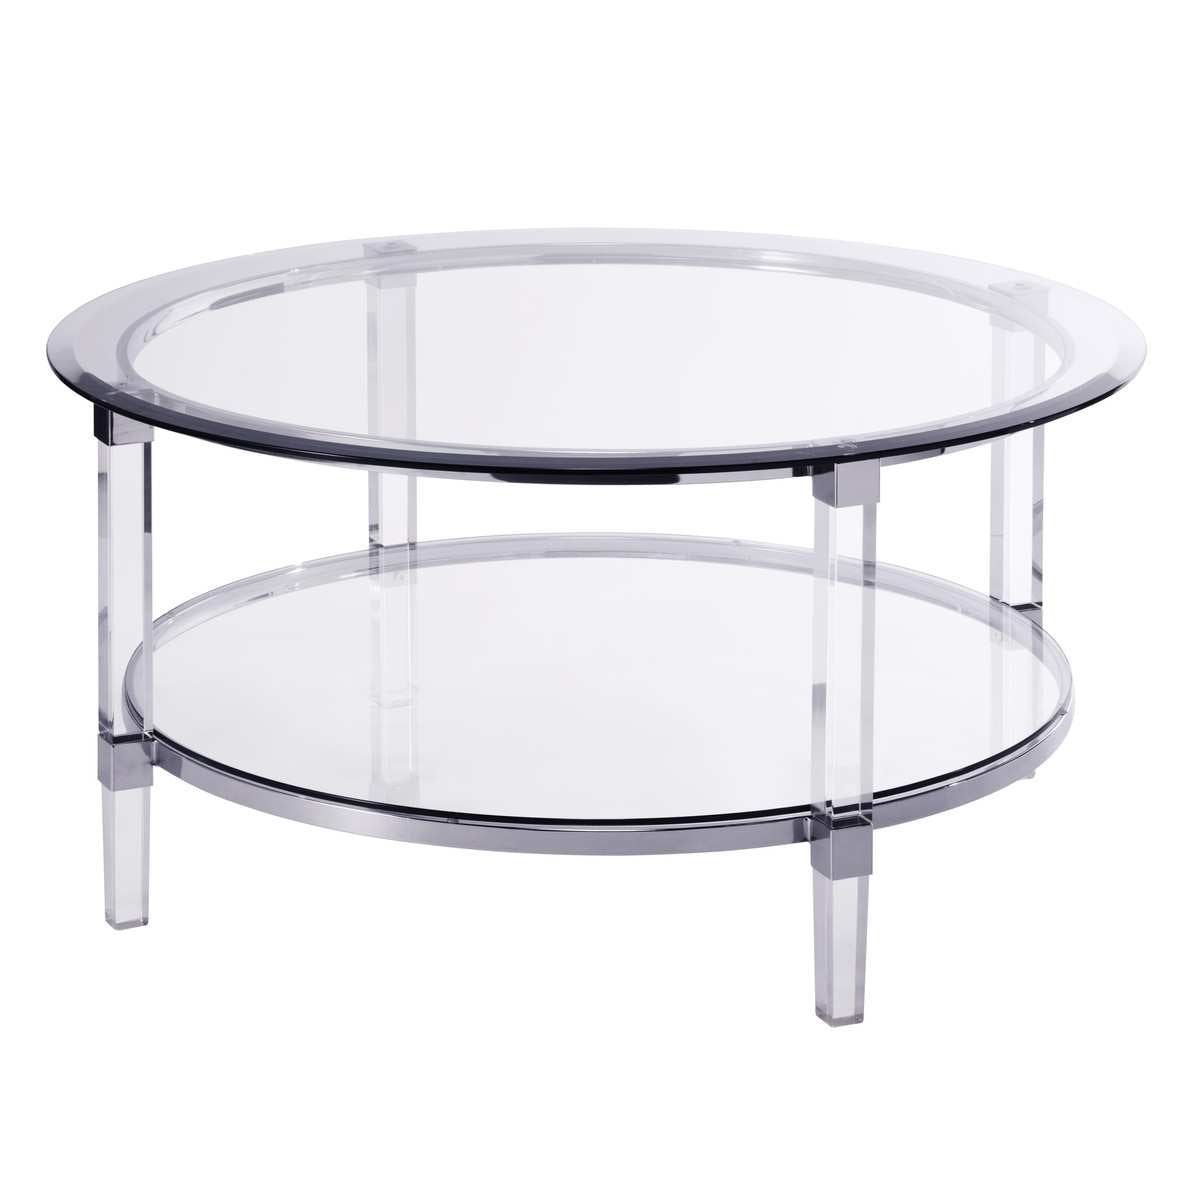 Lyrica Round Coffee Table Collection with Acrylic Legs 3656-01